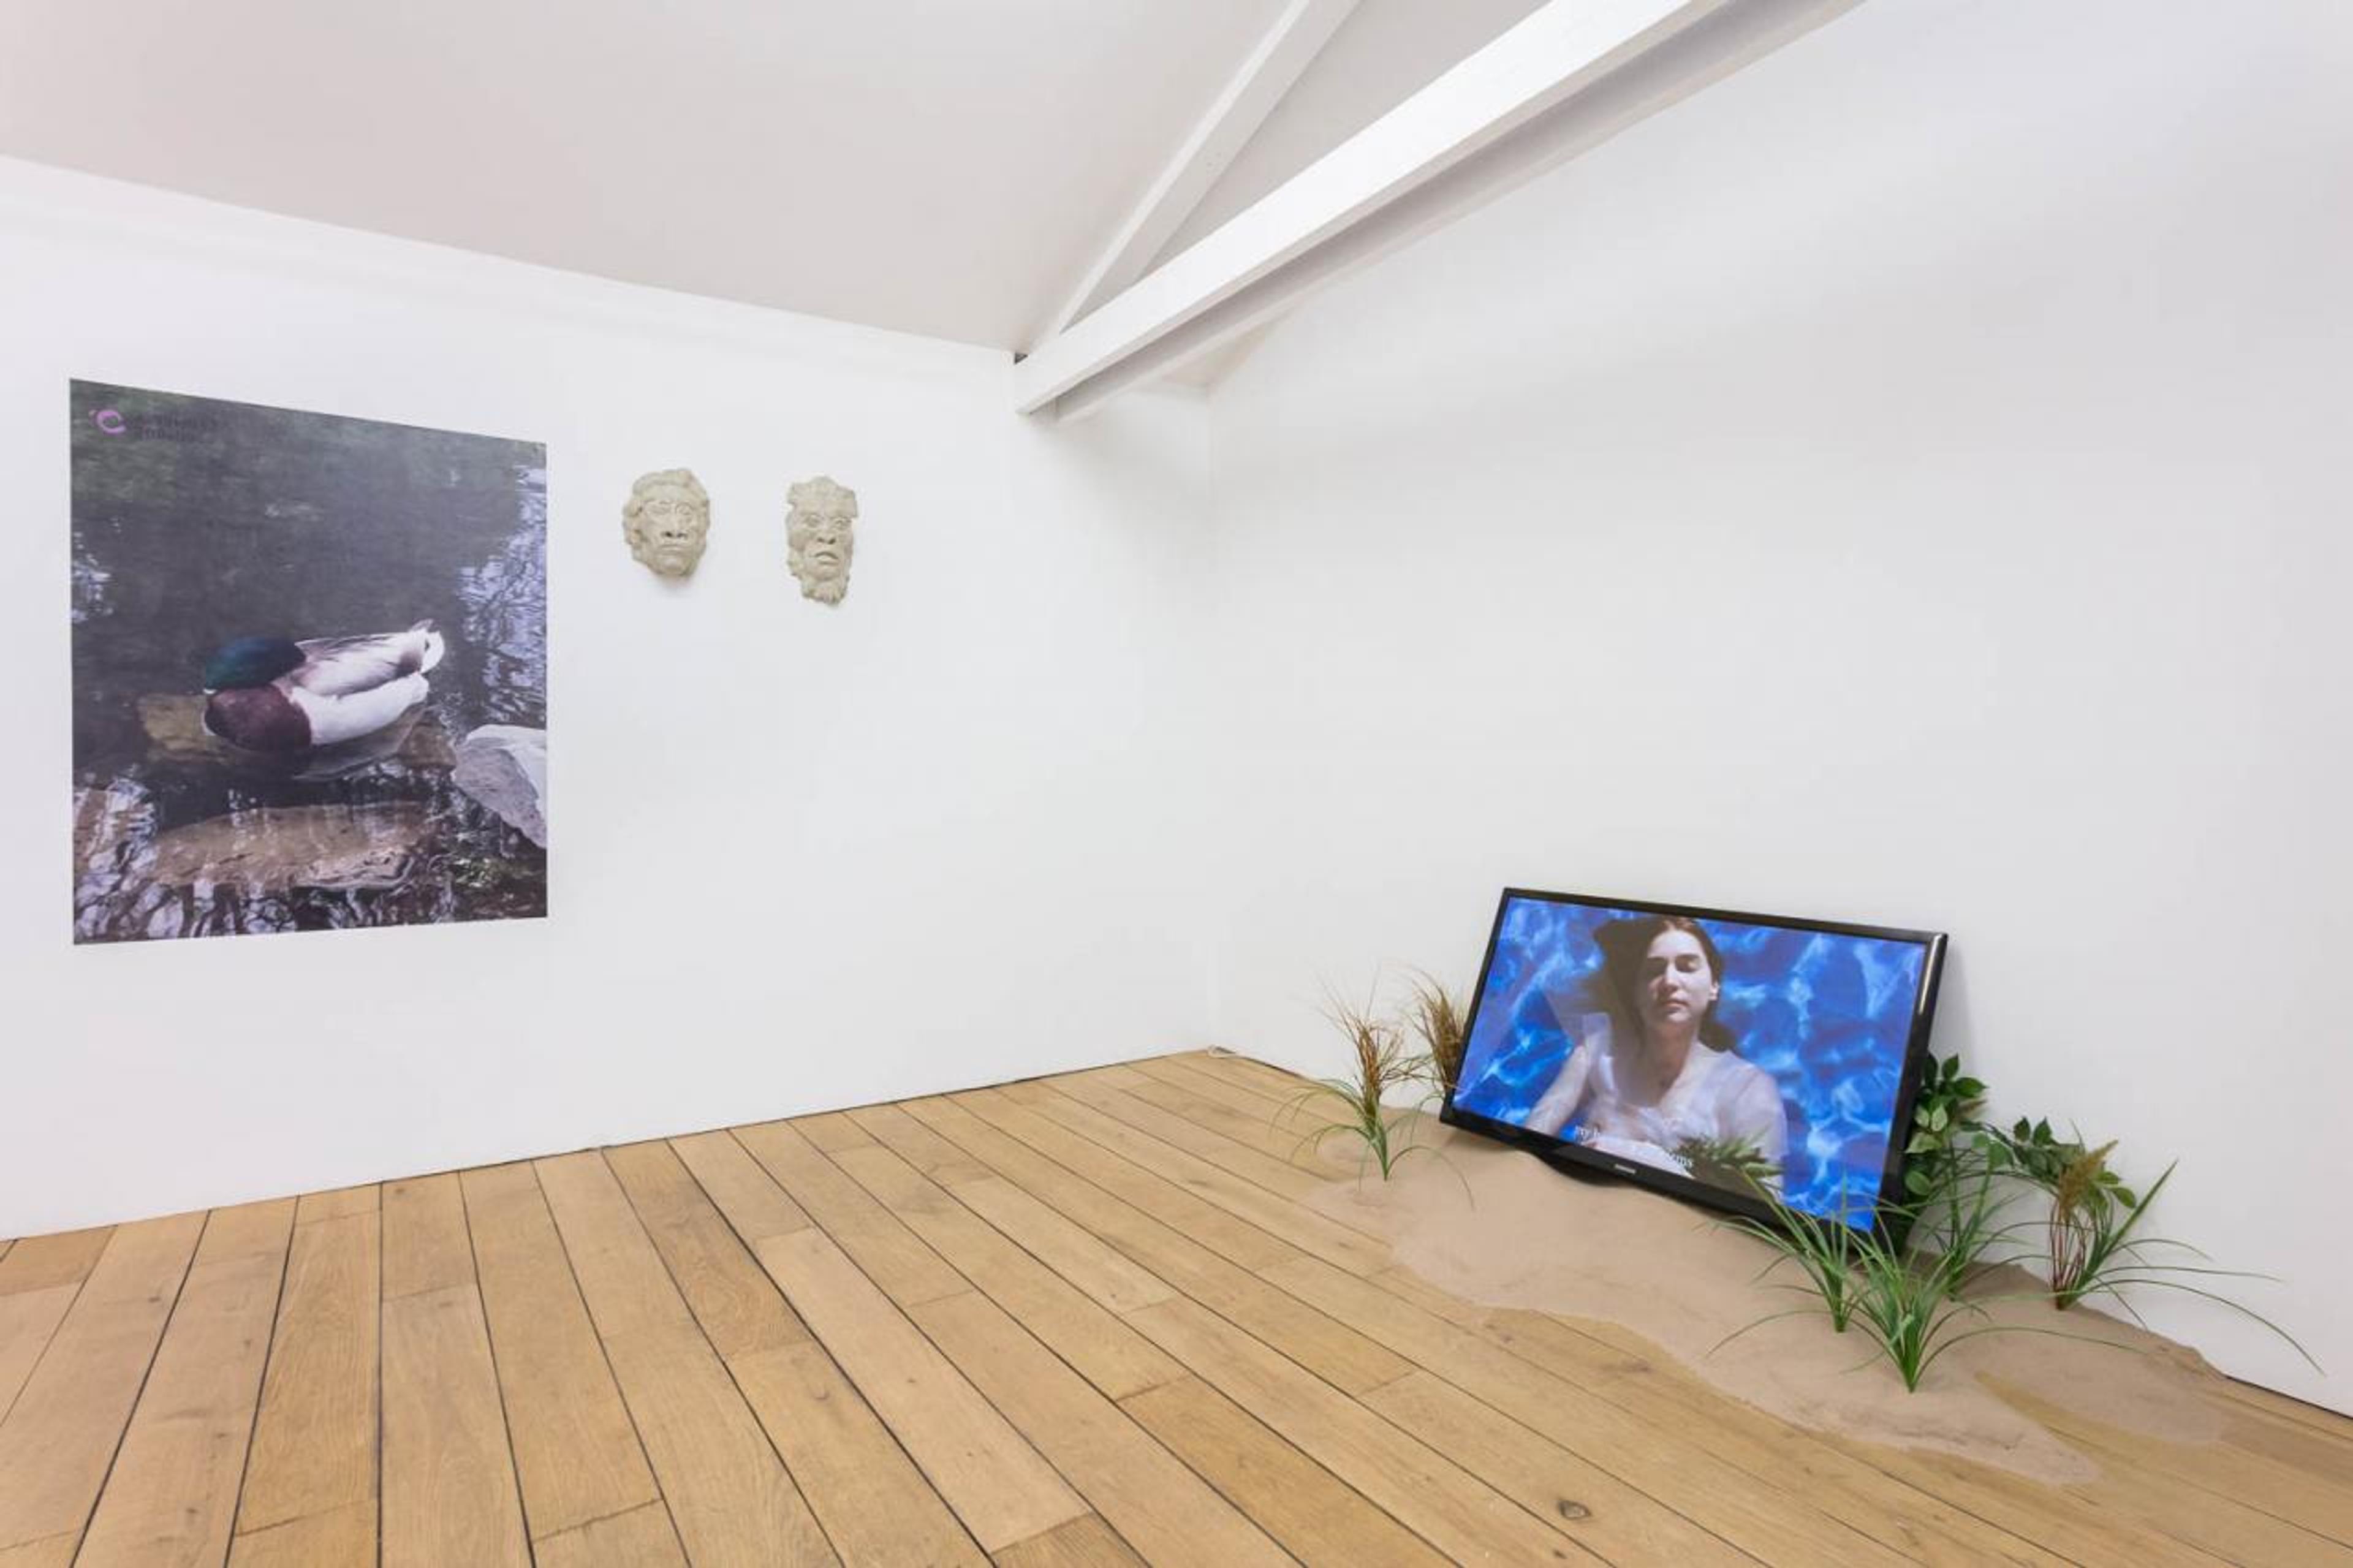 Exhibition view from Condo 2018 at Southard Reid Courtesy The Artists, Southard Reid London, Bureau NY and Park View LA, Photo: Mark Blower Bureau (New York) and Park View (Los Angeles) hosted by Southard Reid